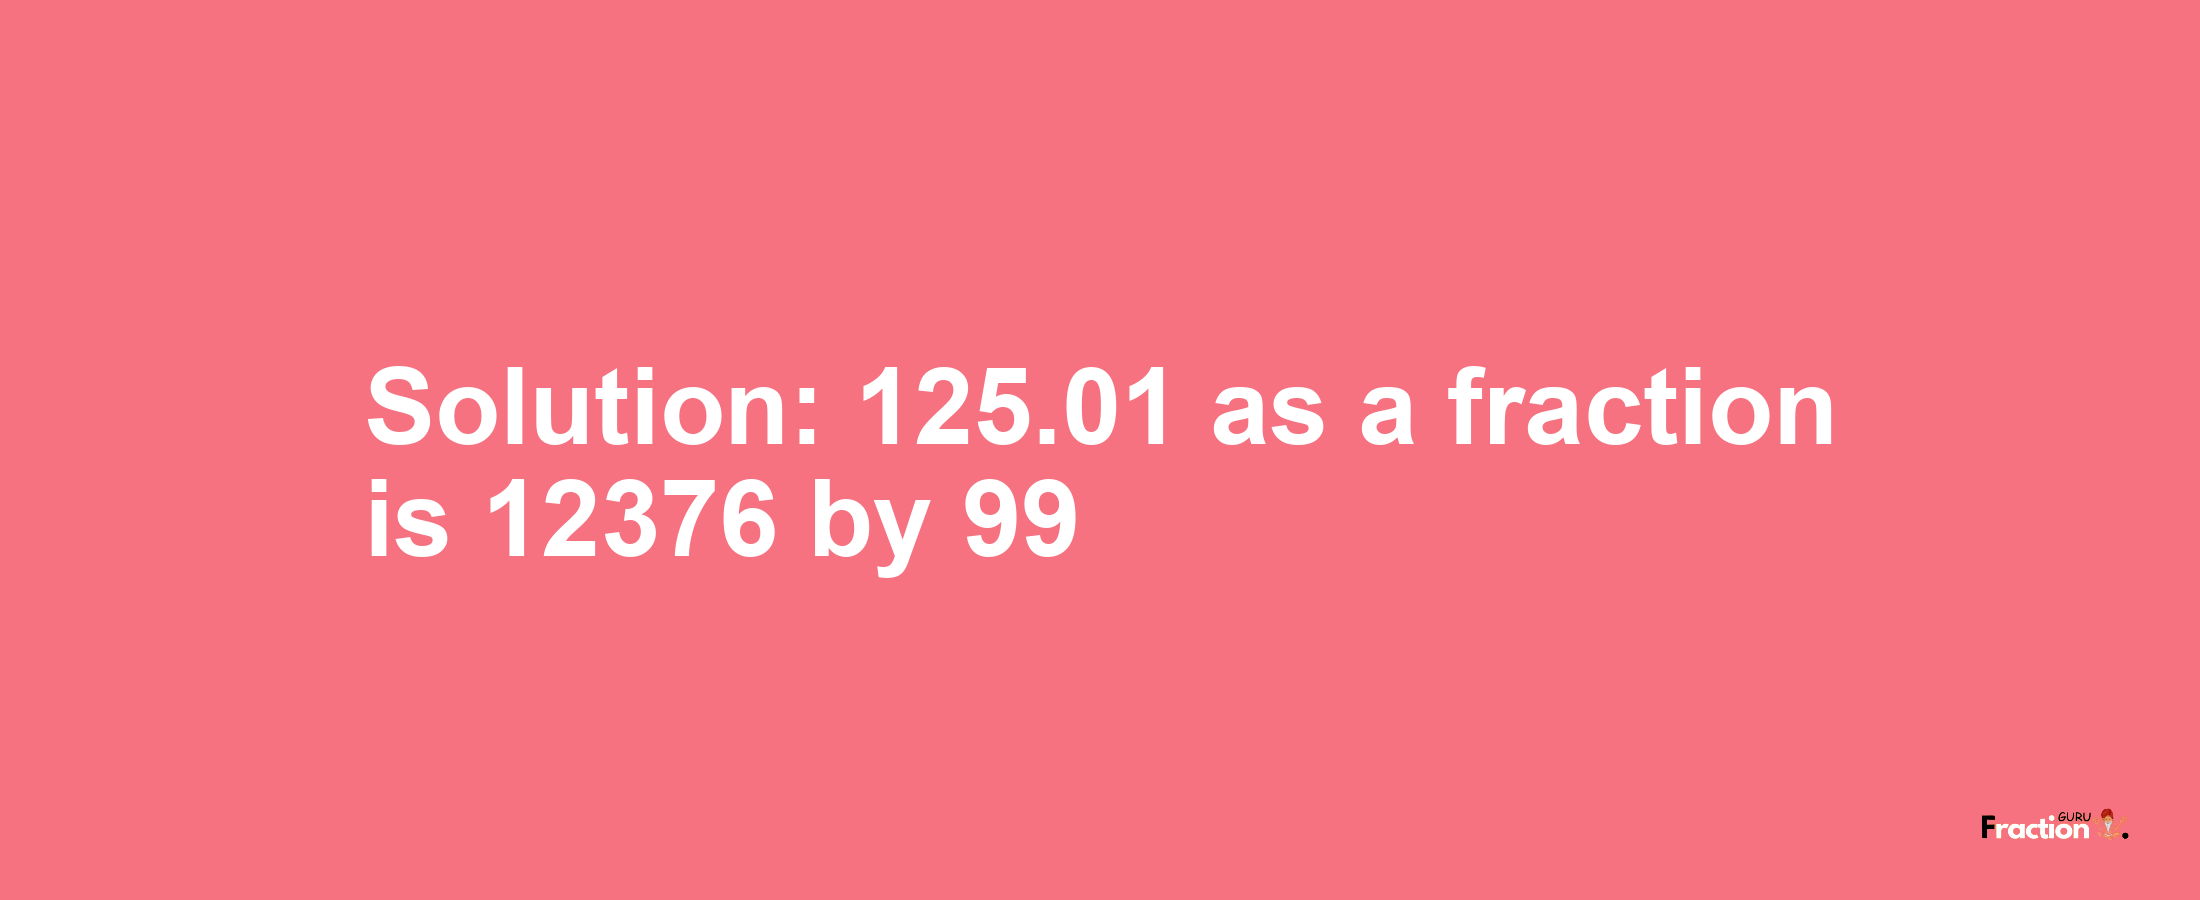 Solution:125.01 as a fraction is 12376/99